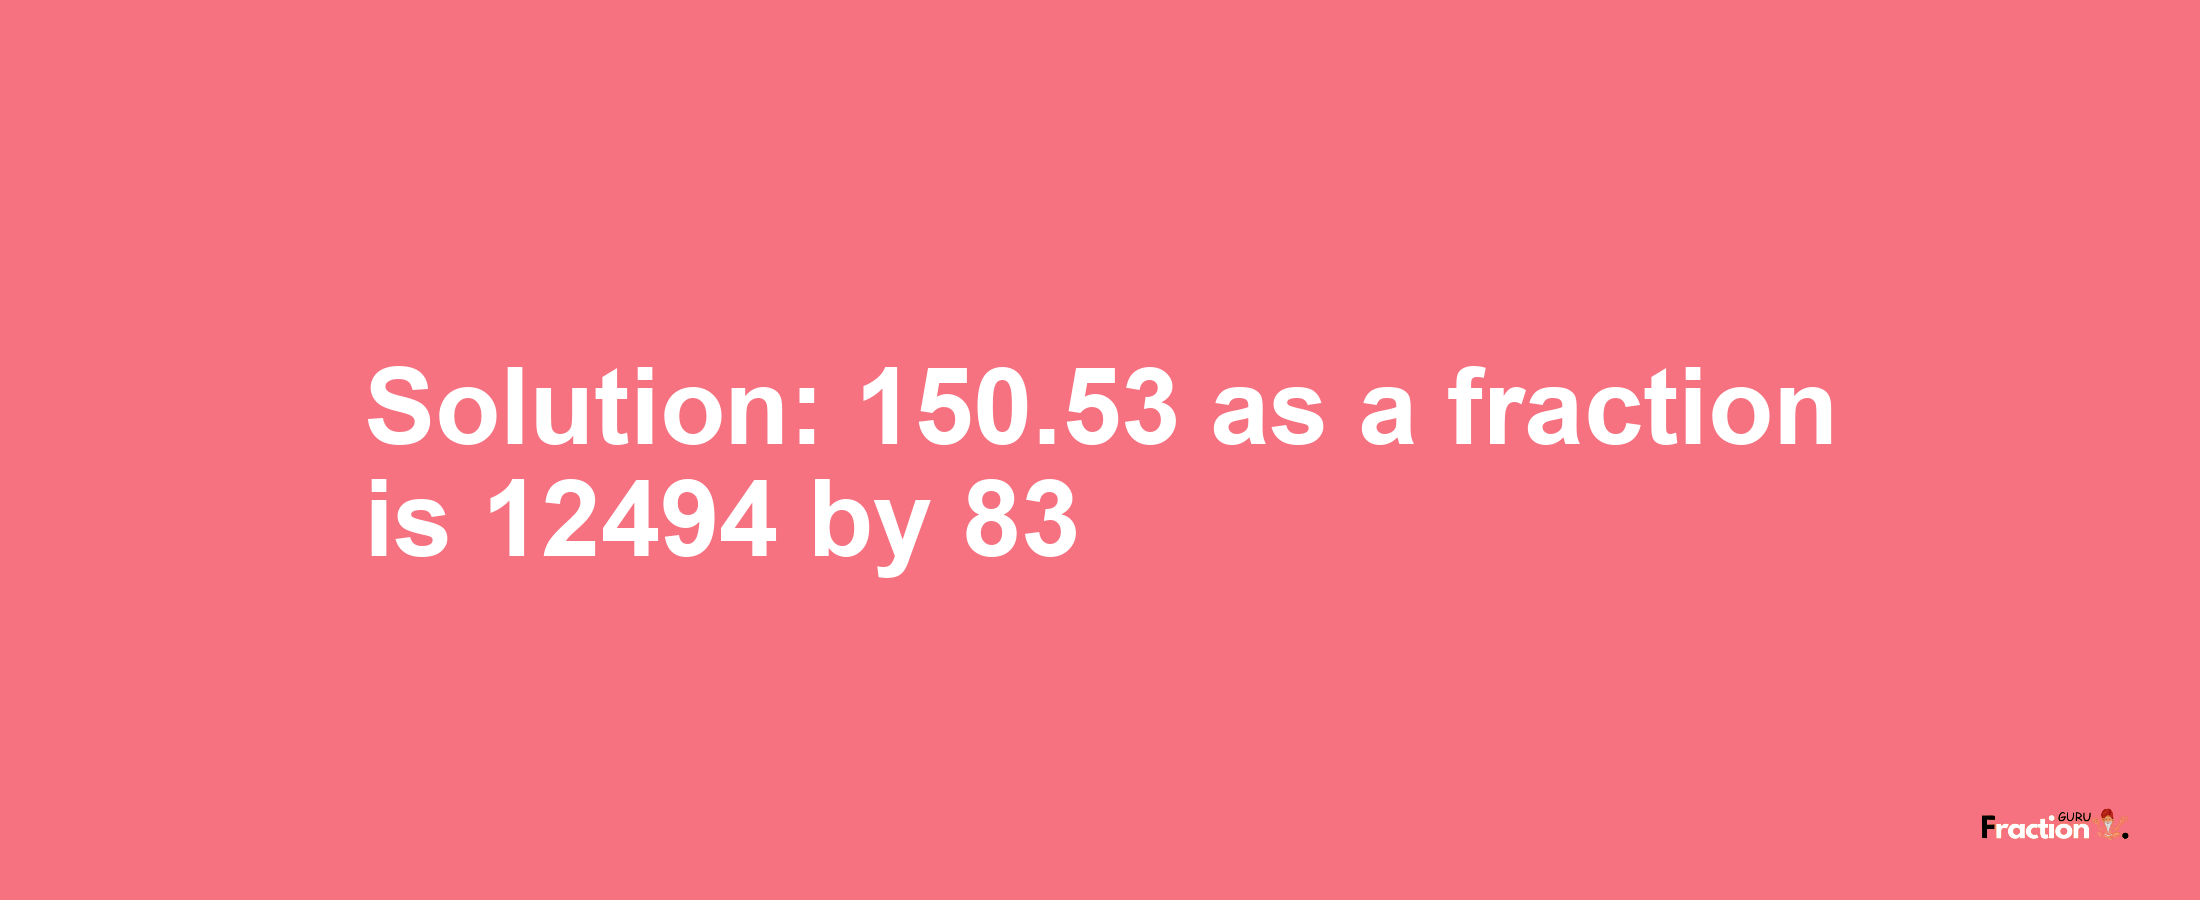 Solution:150.53 as a fraction is 12494/83